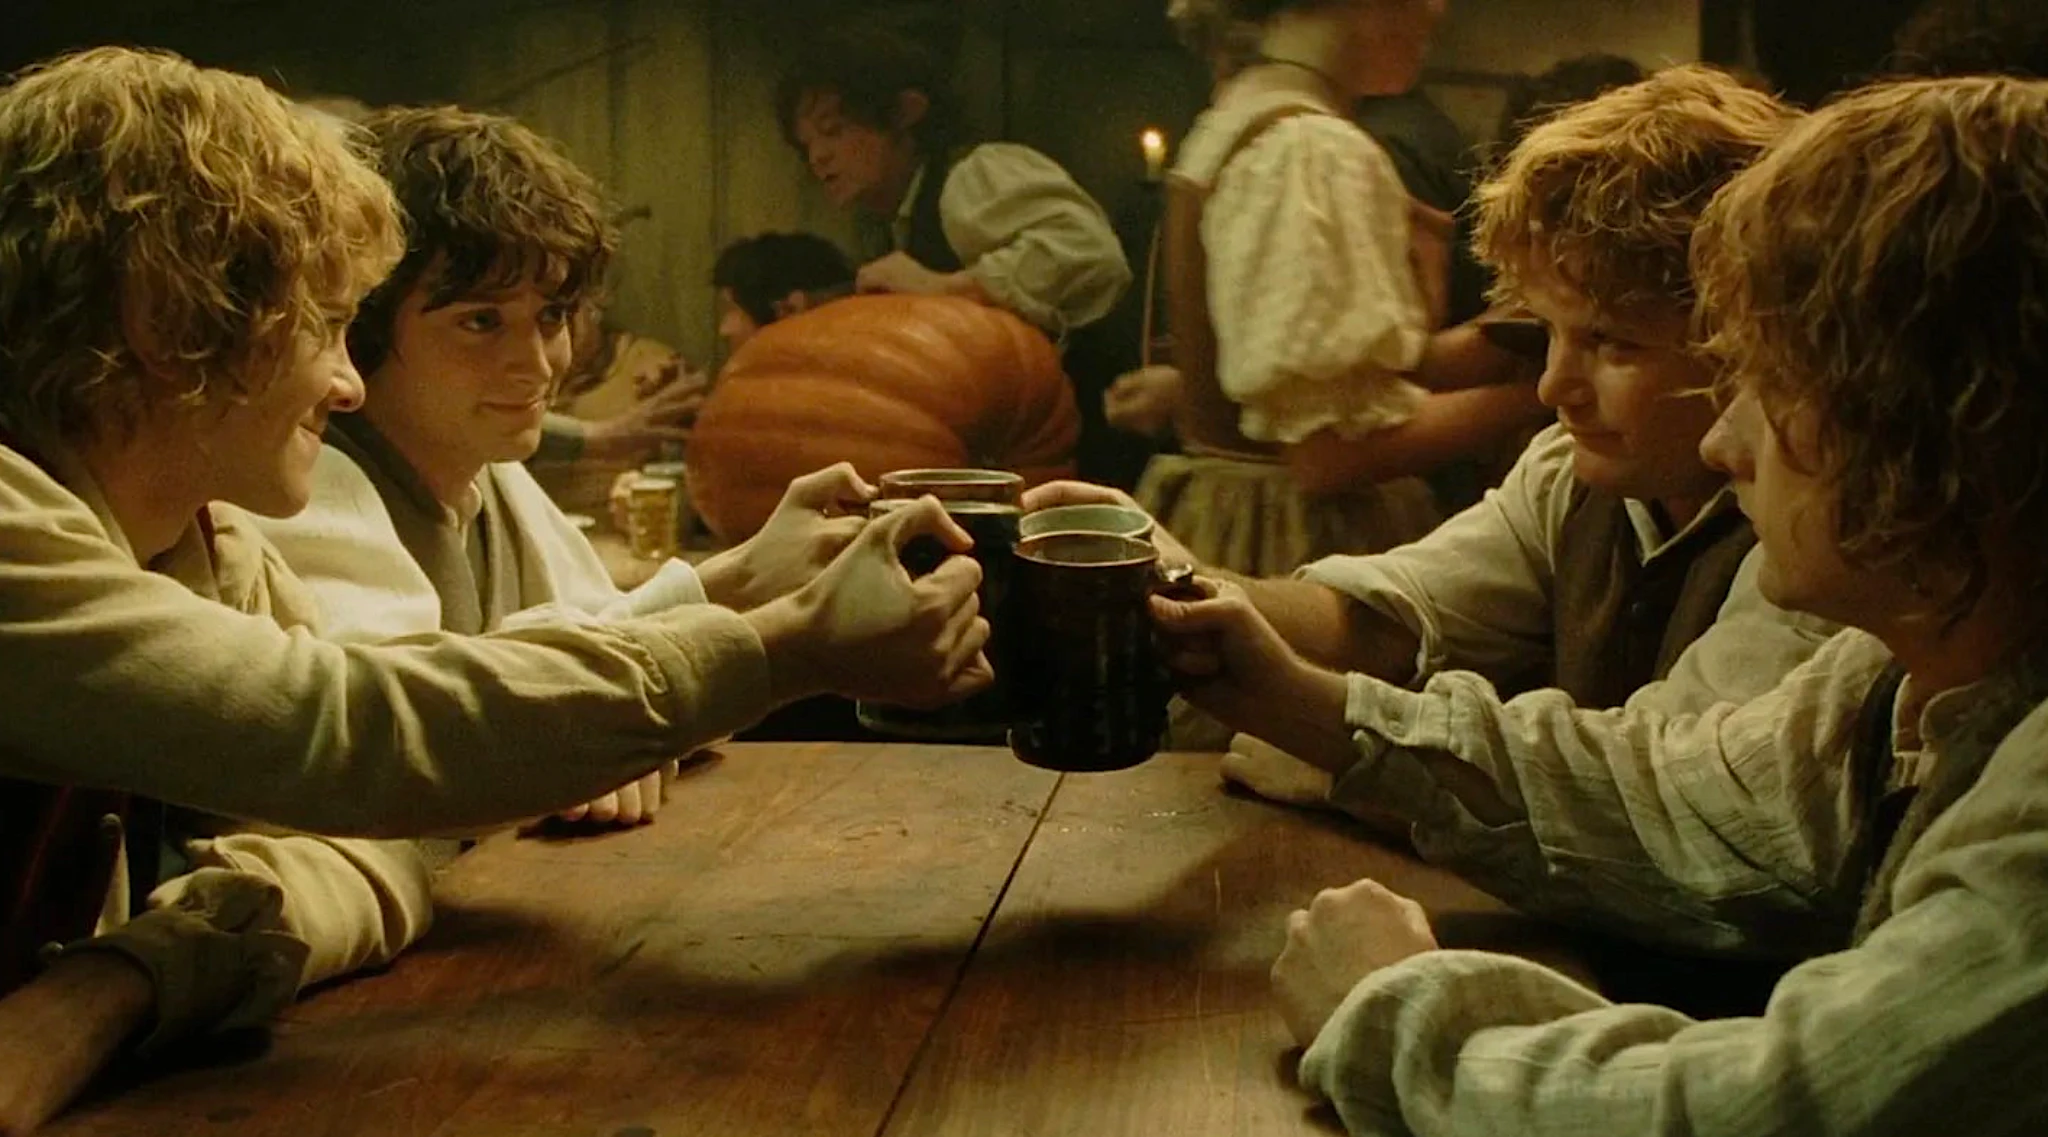 'The Lord of the Rings' Original Hobbit Stars Reunite for Dinner and an Adorable Photo